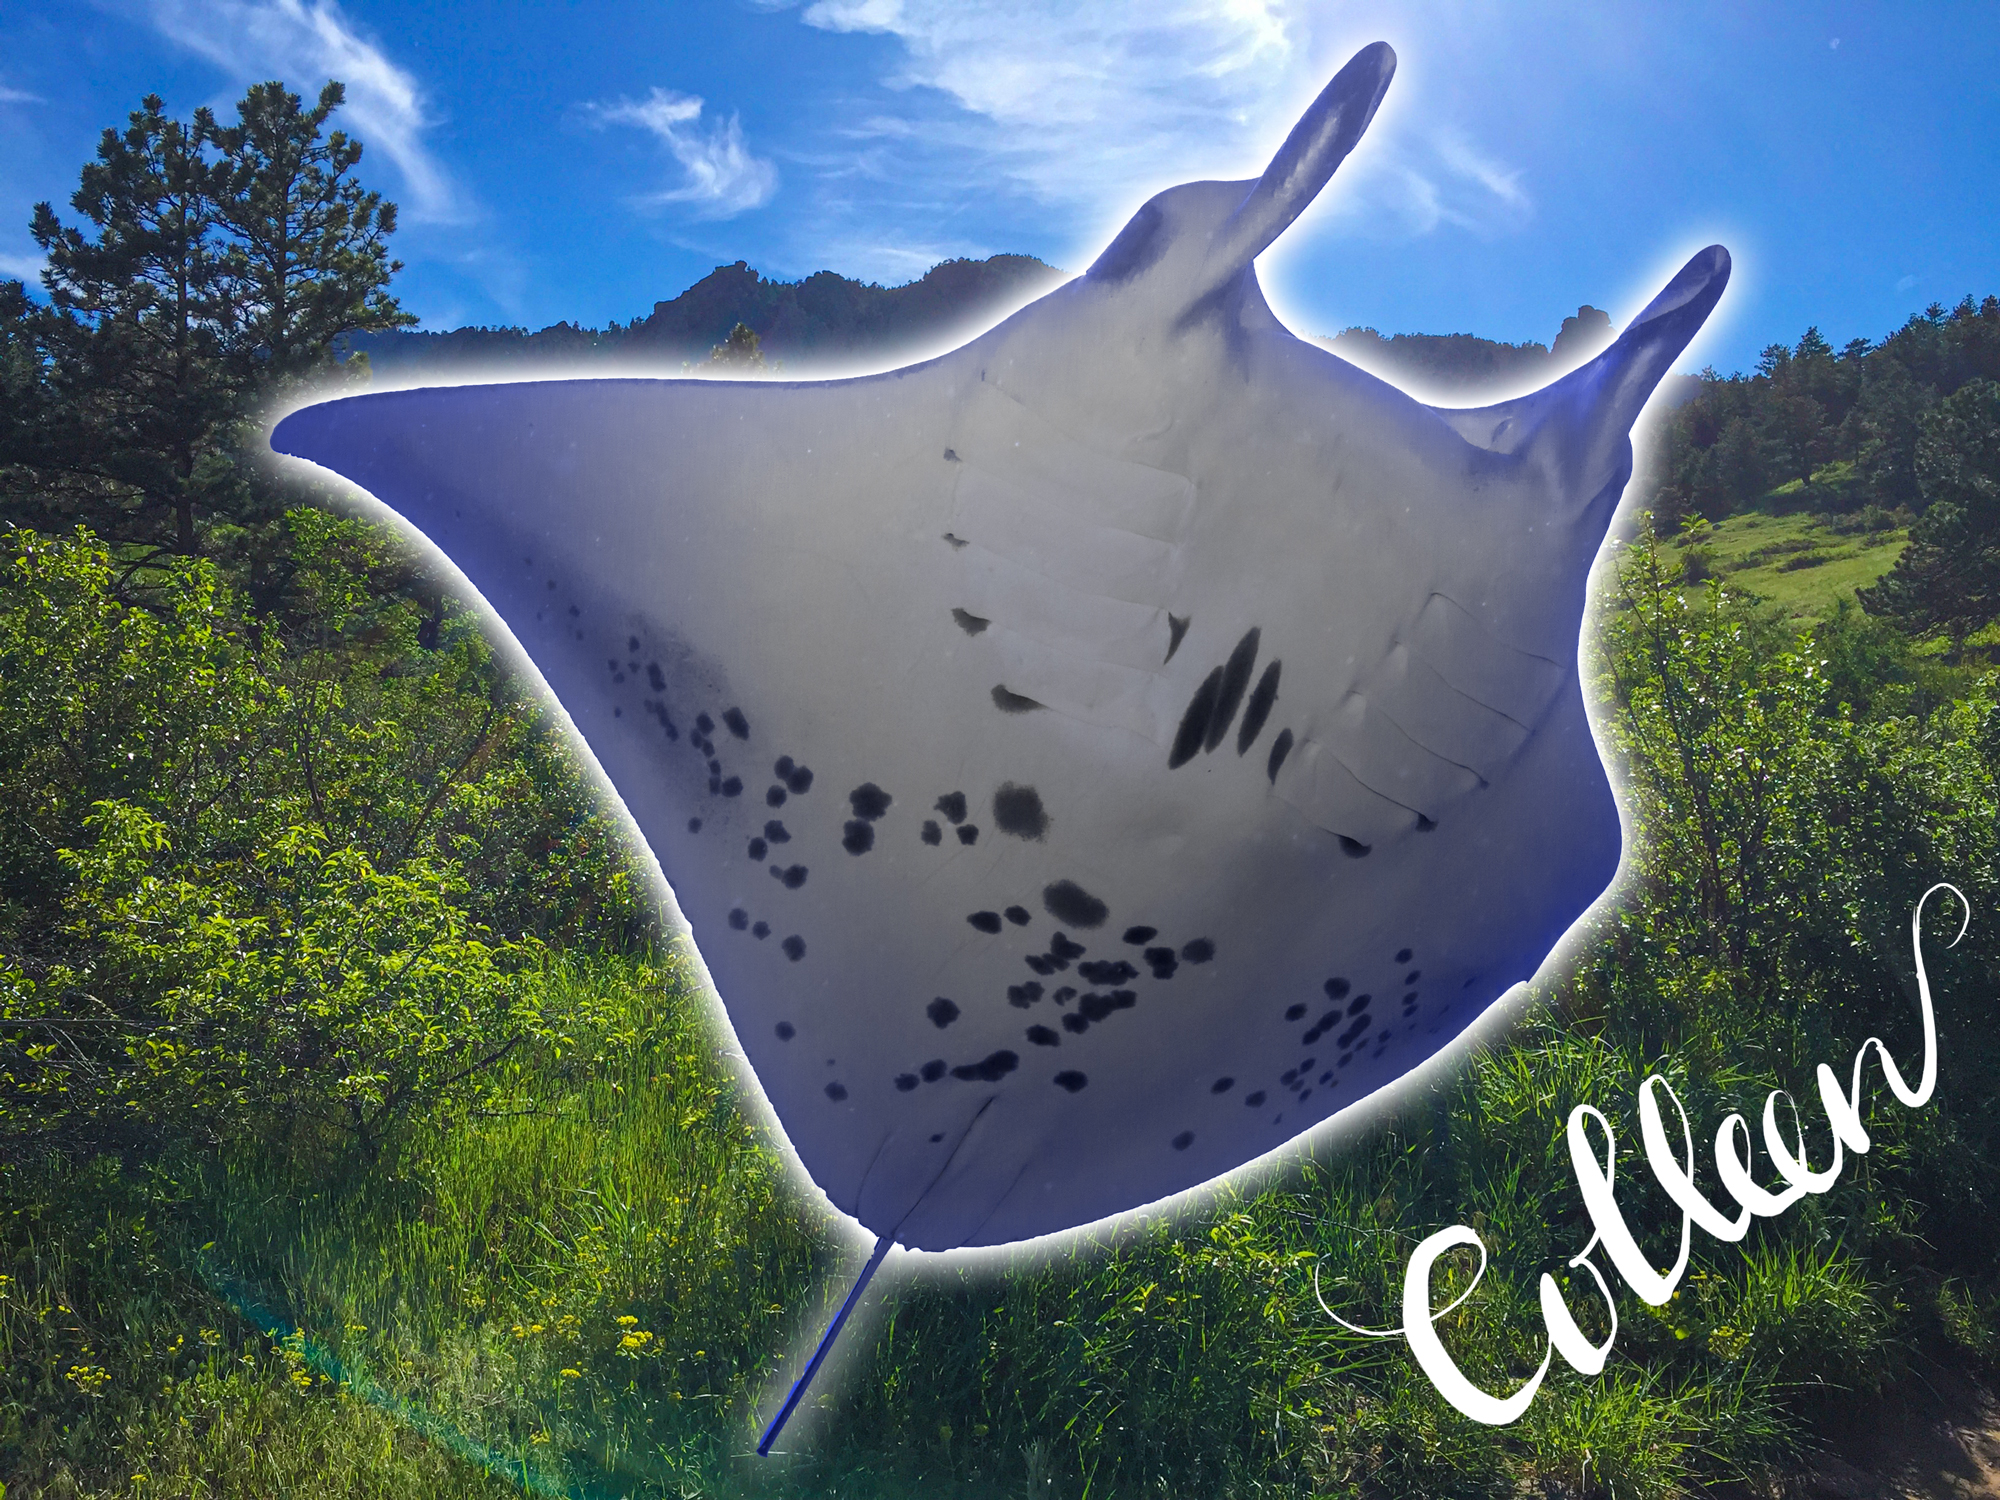 Manta composite over foliage with Colleen signature